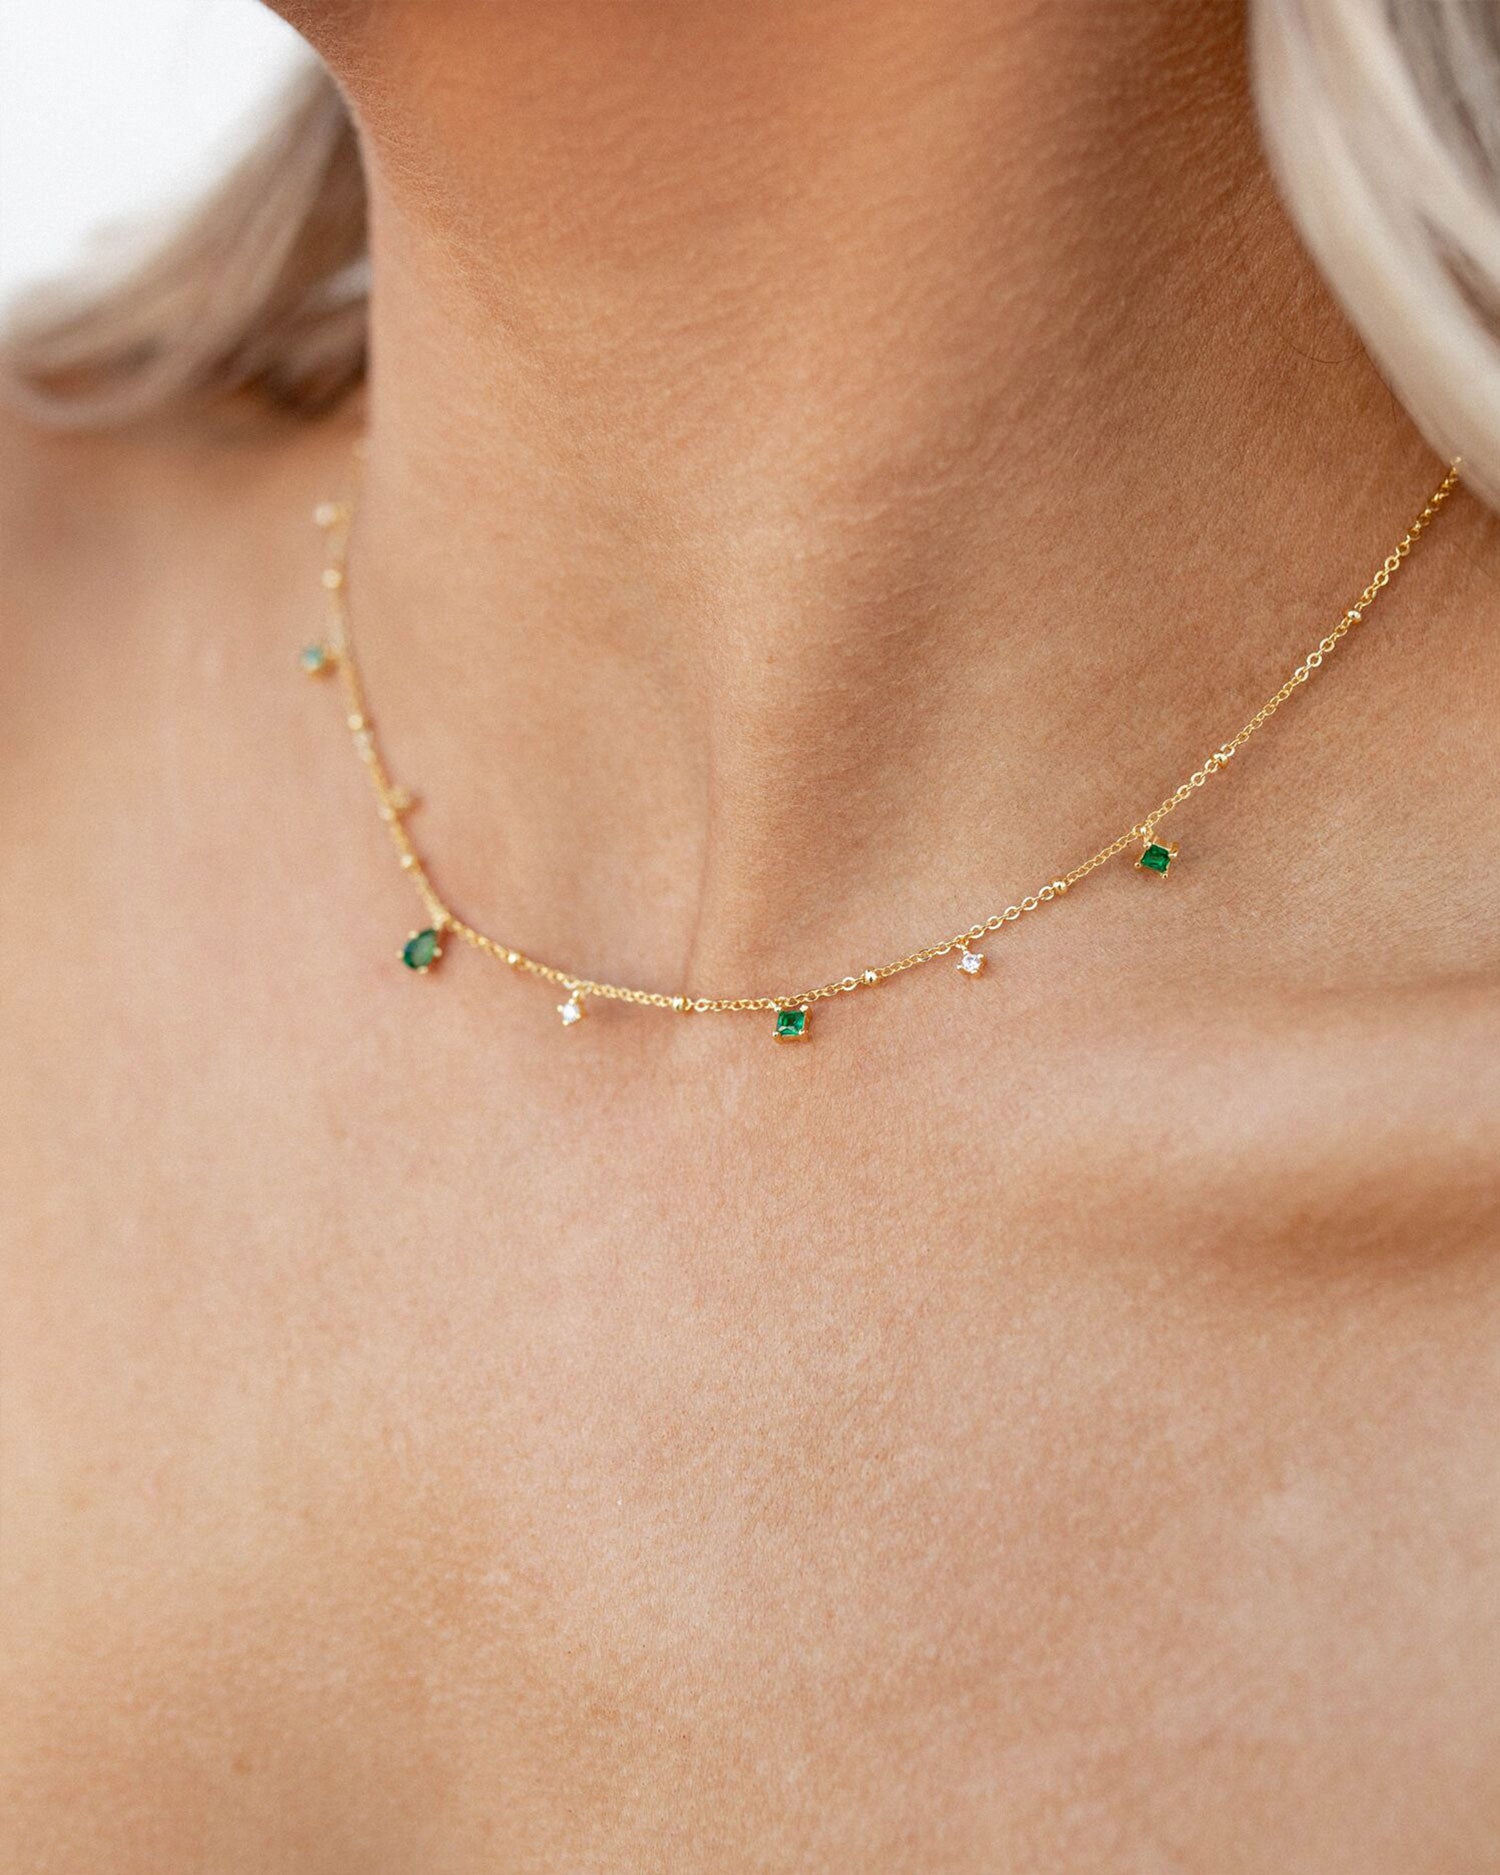 Elysee Collier in Emerald Green